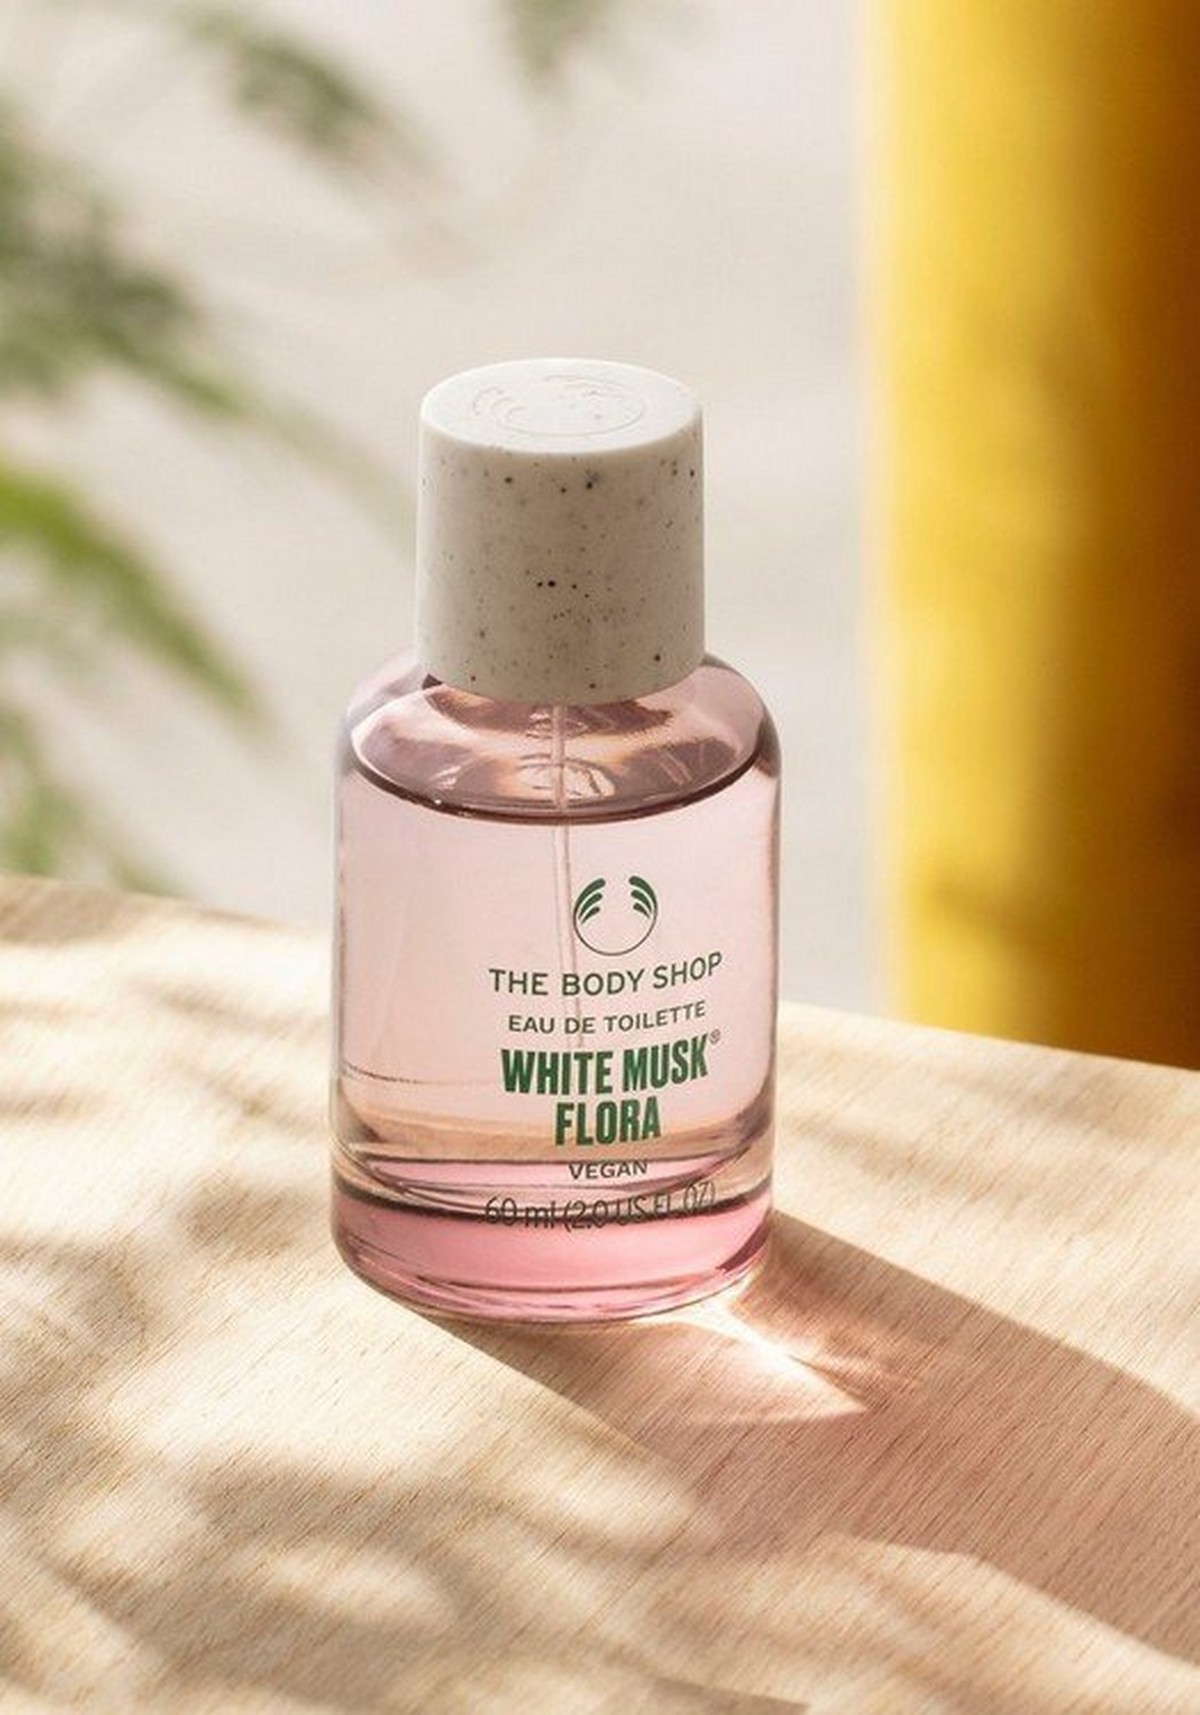 THE BODY SHOP WHITE MUSK FLORA EDT